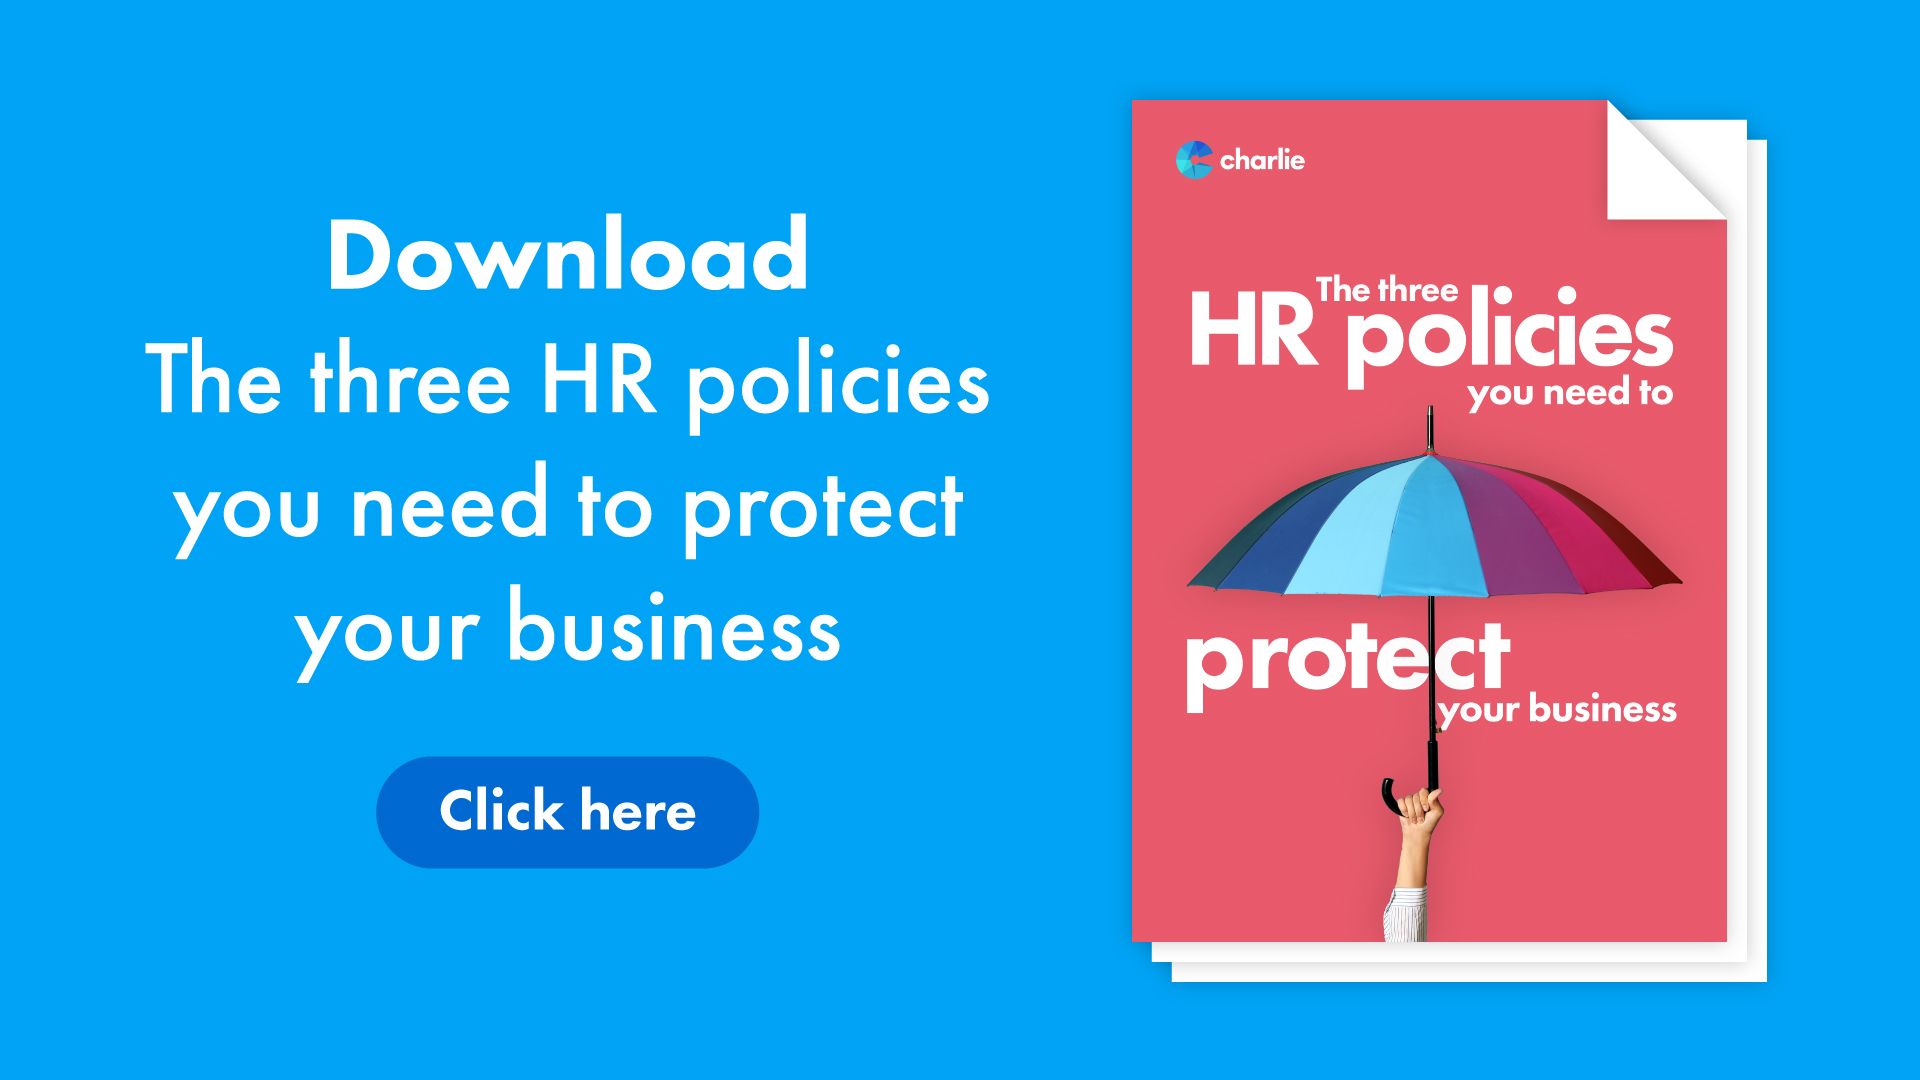 Click here to download the Three policies you need for your business